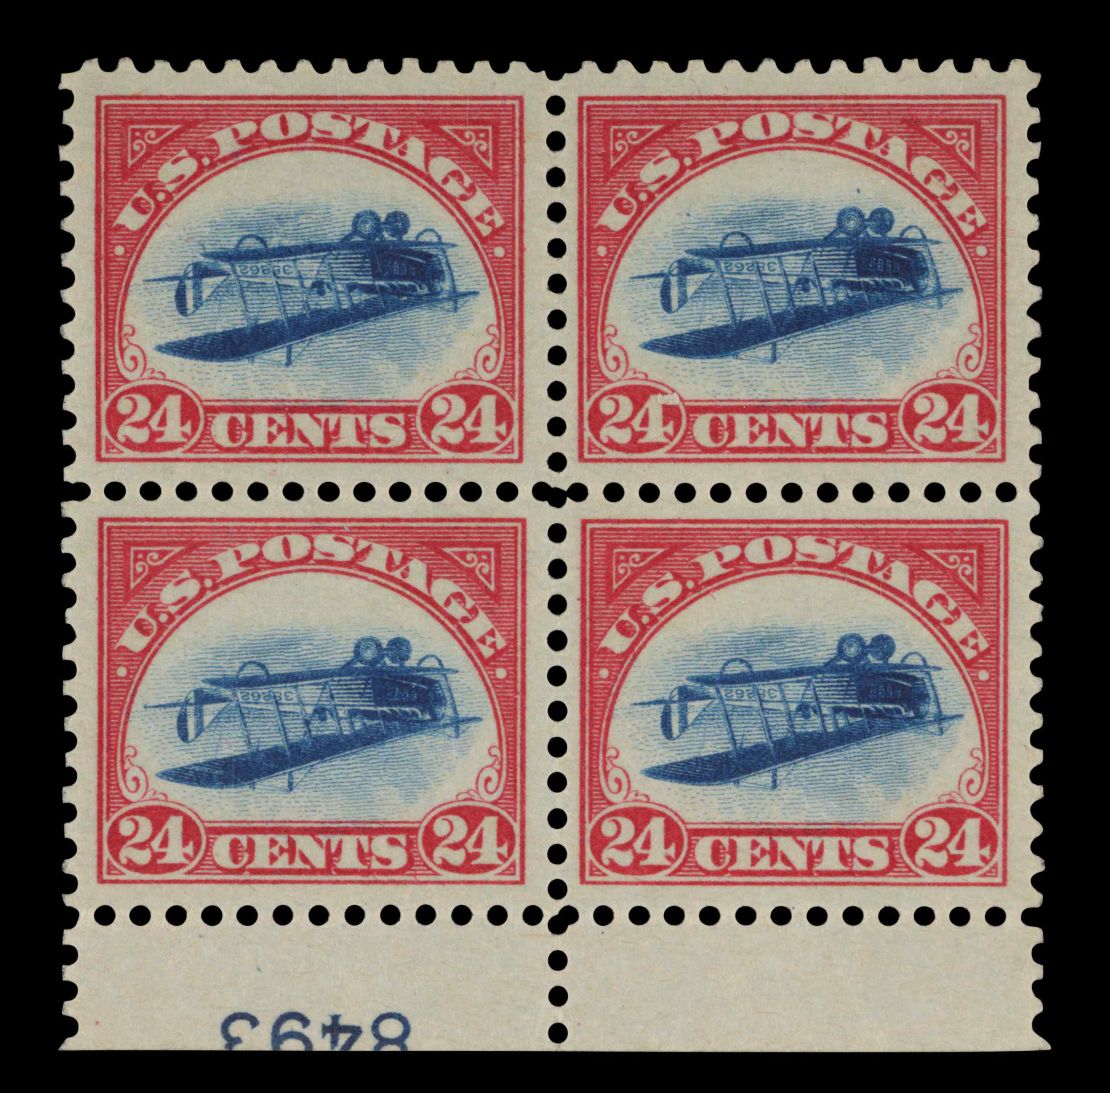 A printing error causes the planes to appear upside down on 100 of these 1918 airmail stamps. 